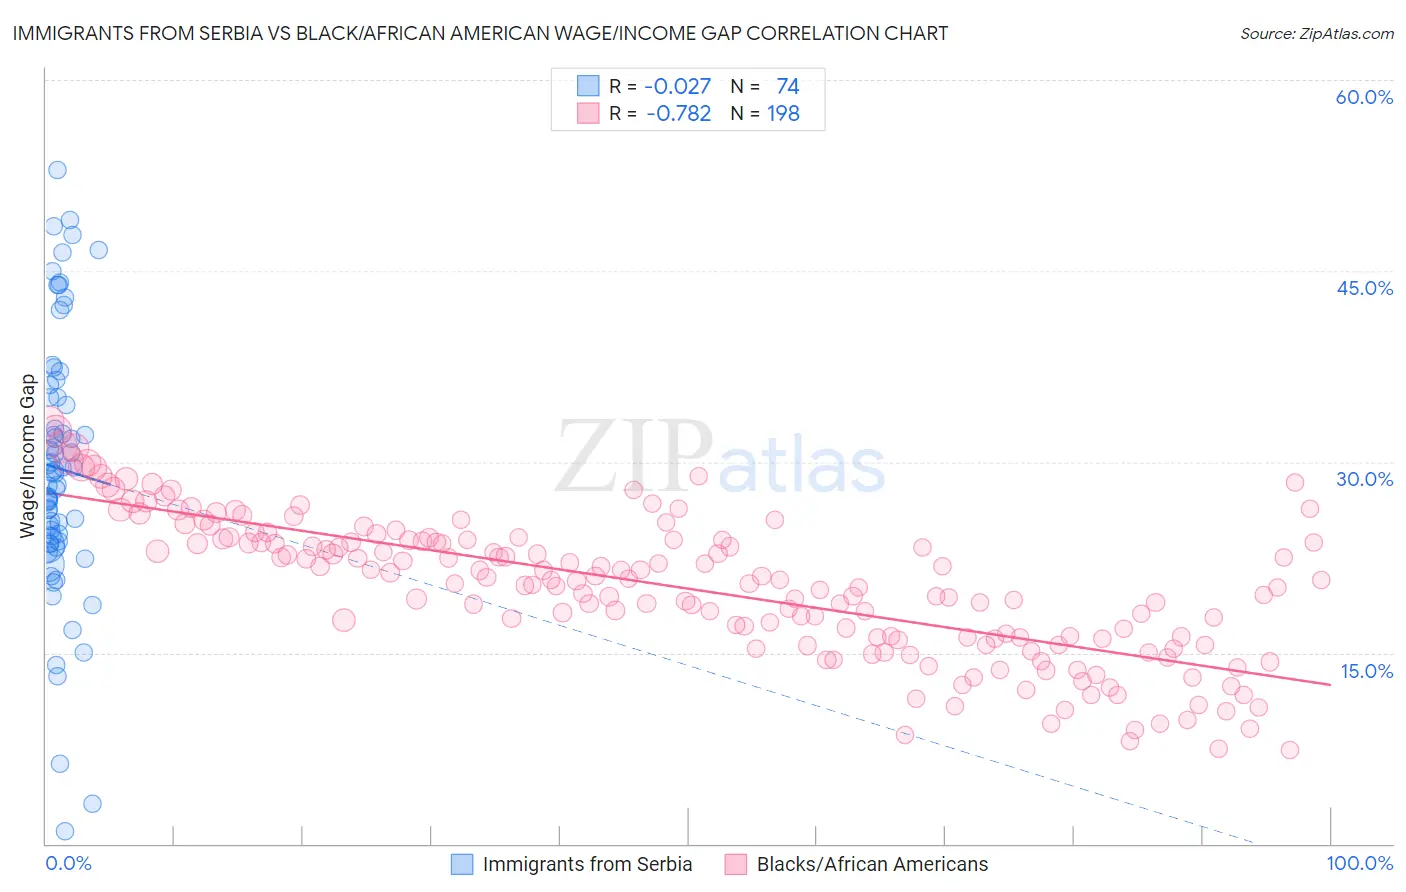 Immigrants from Serbia vs Black/African American Wage/Income Gap